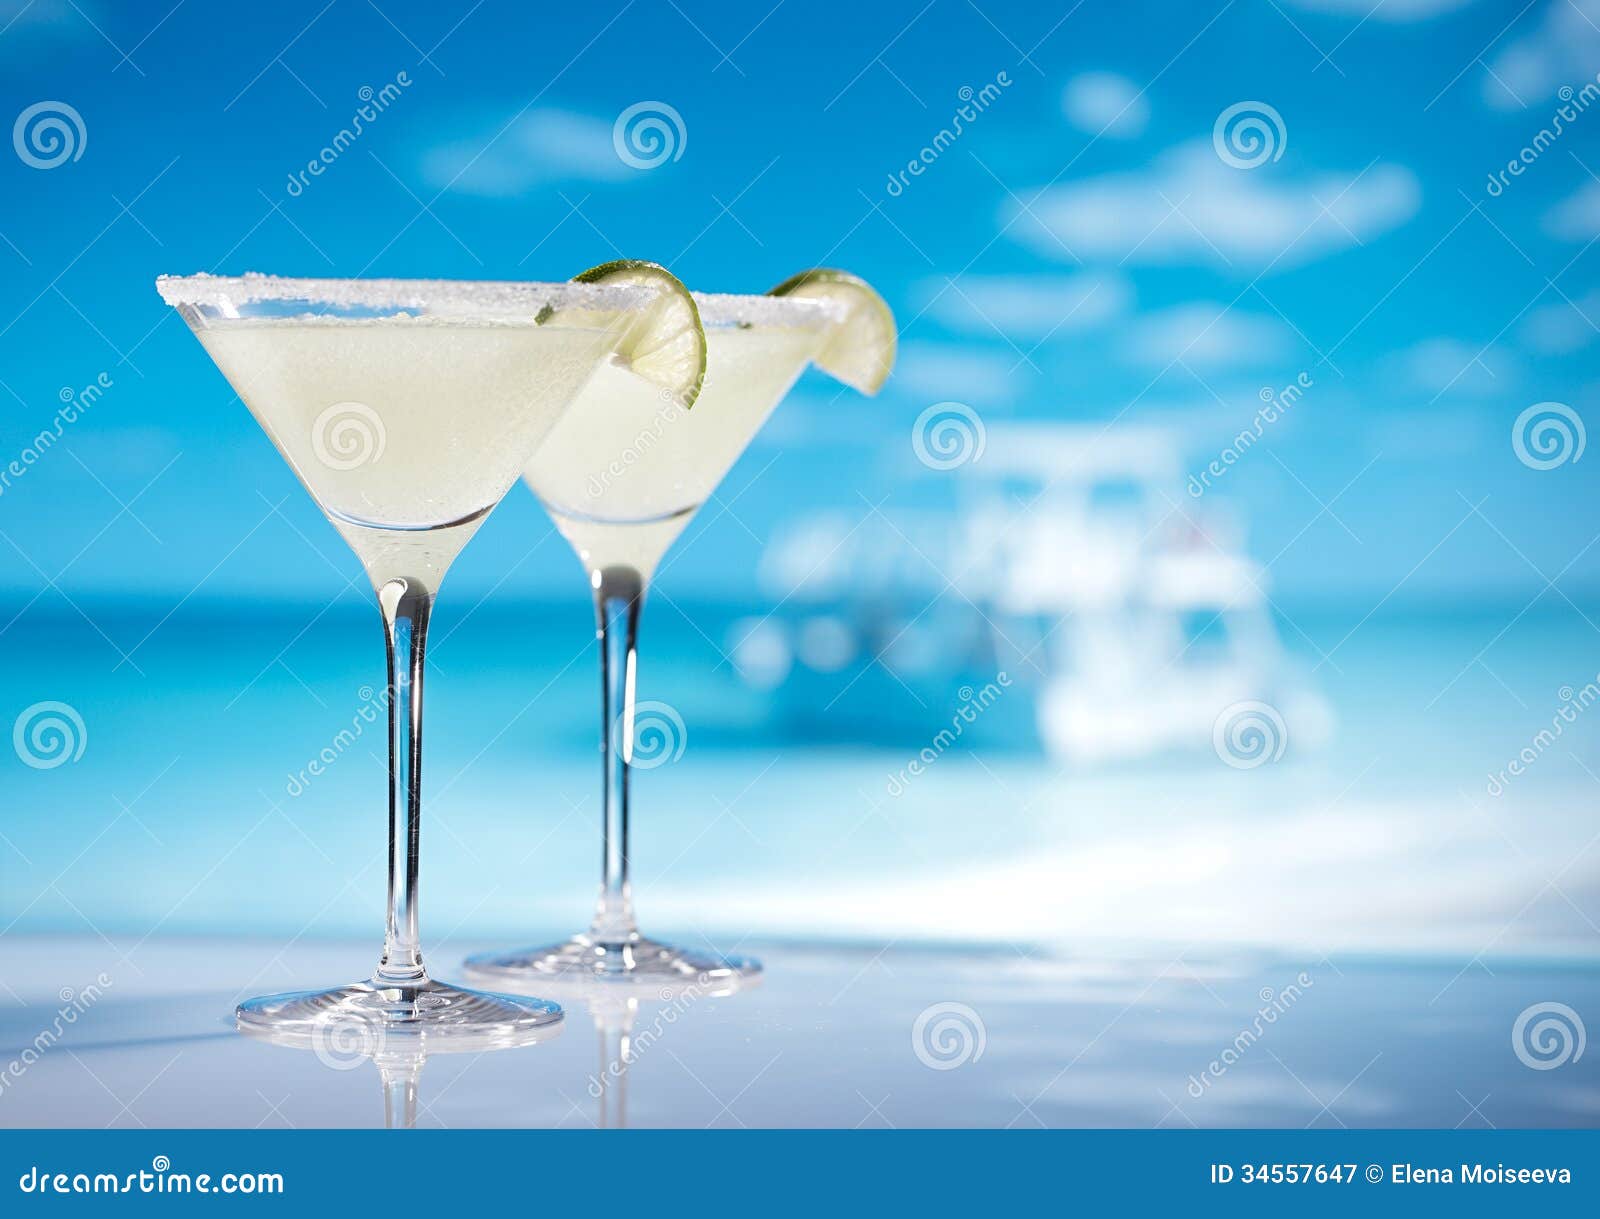 margarita cocktail on beach, blue sea and sky background